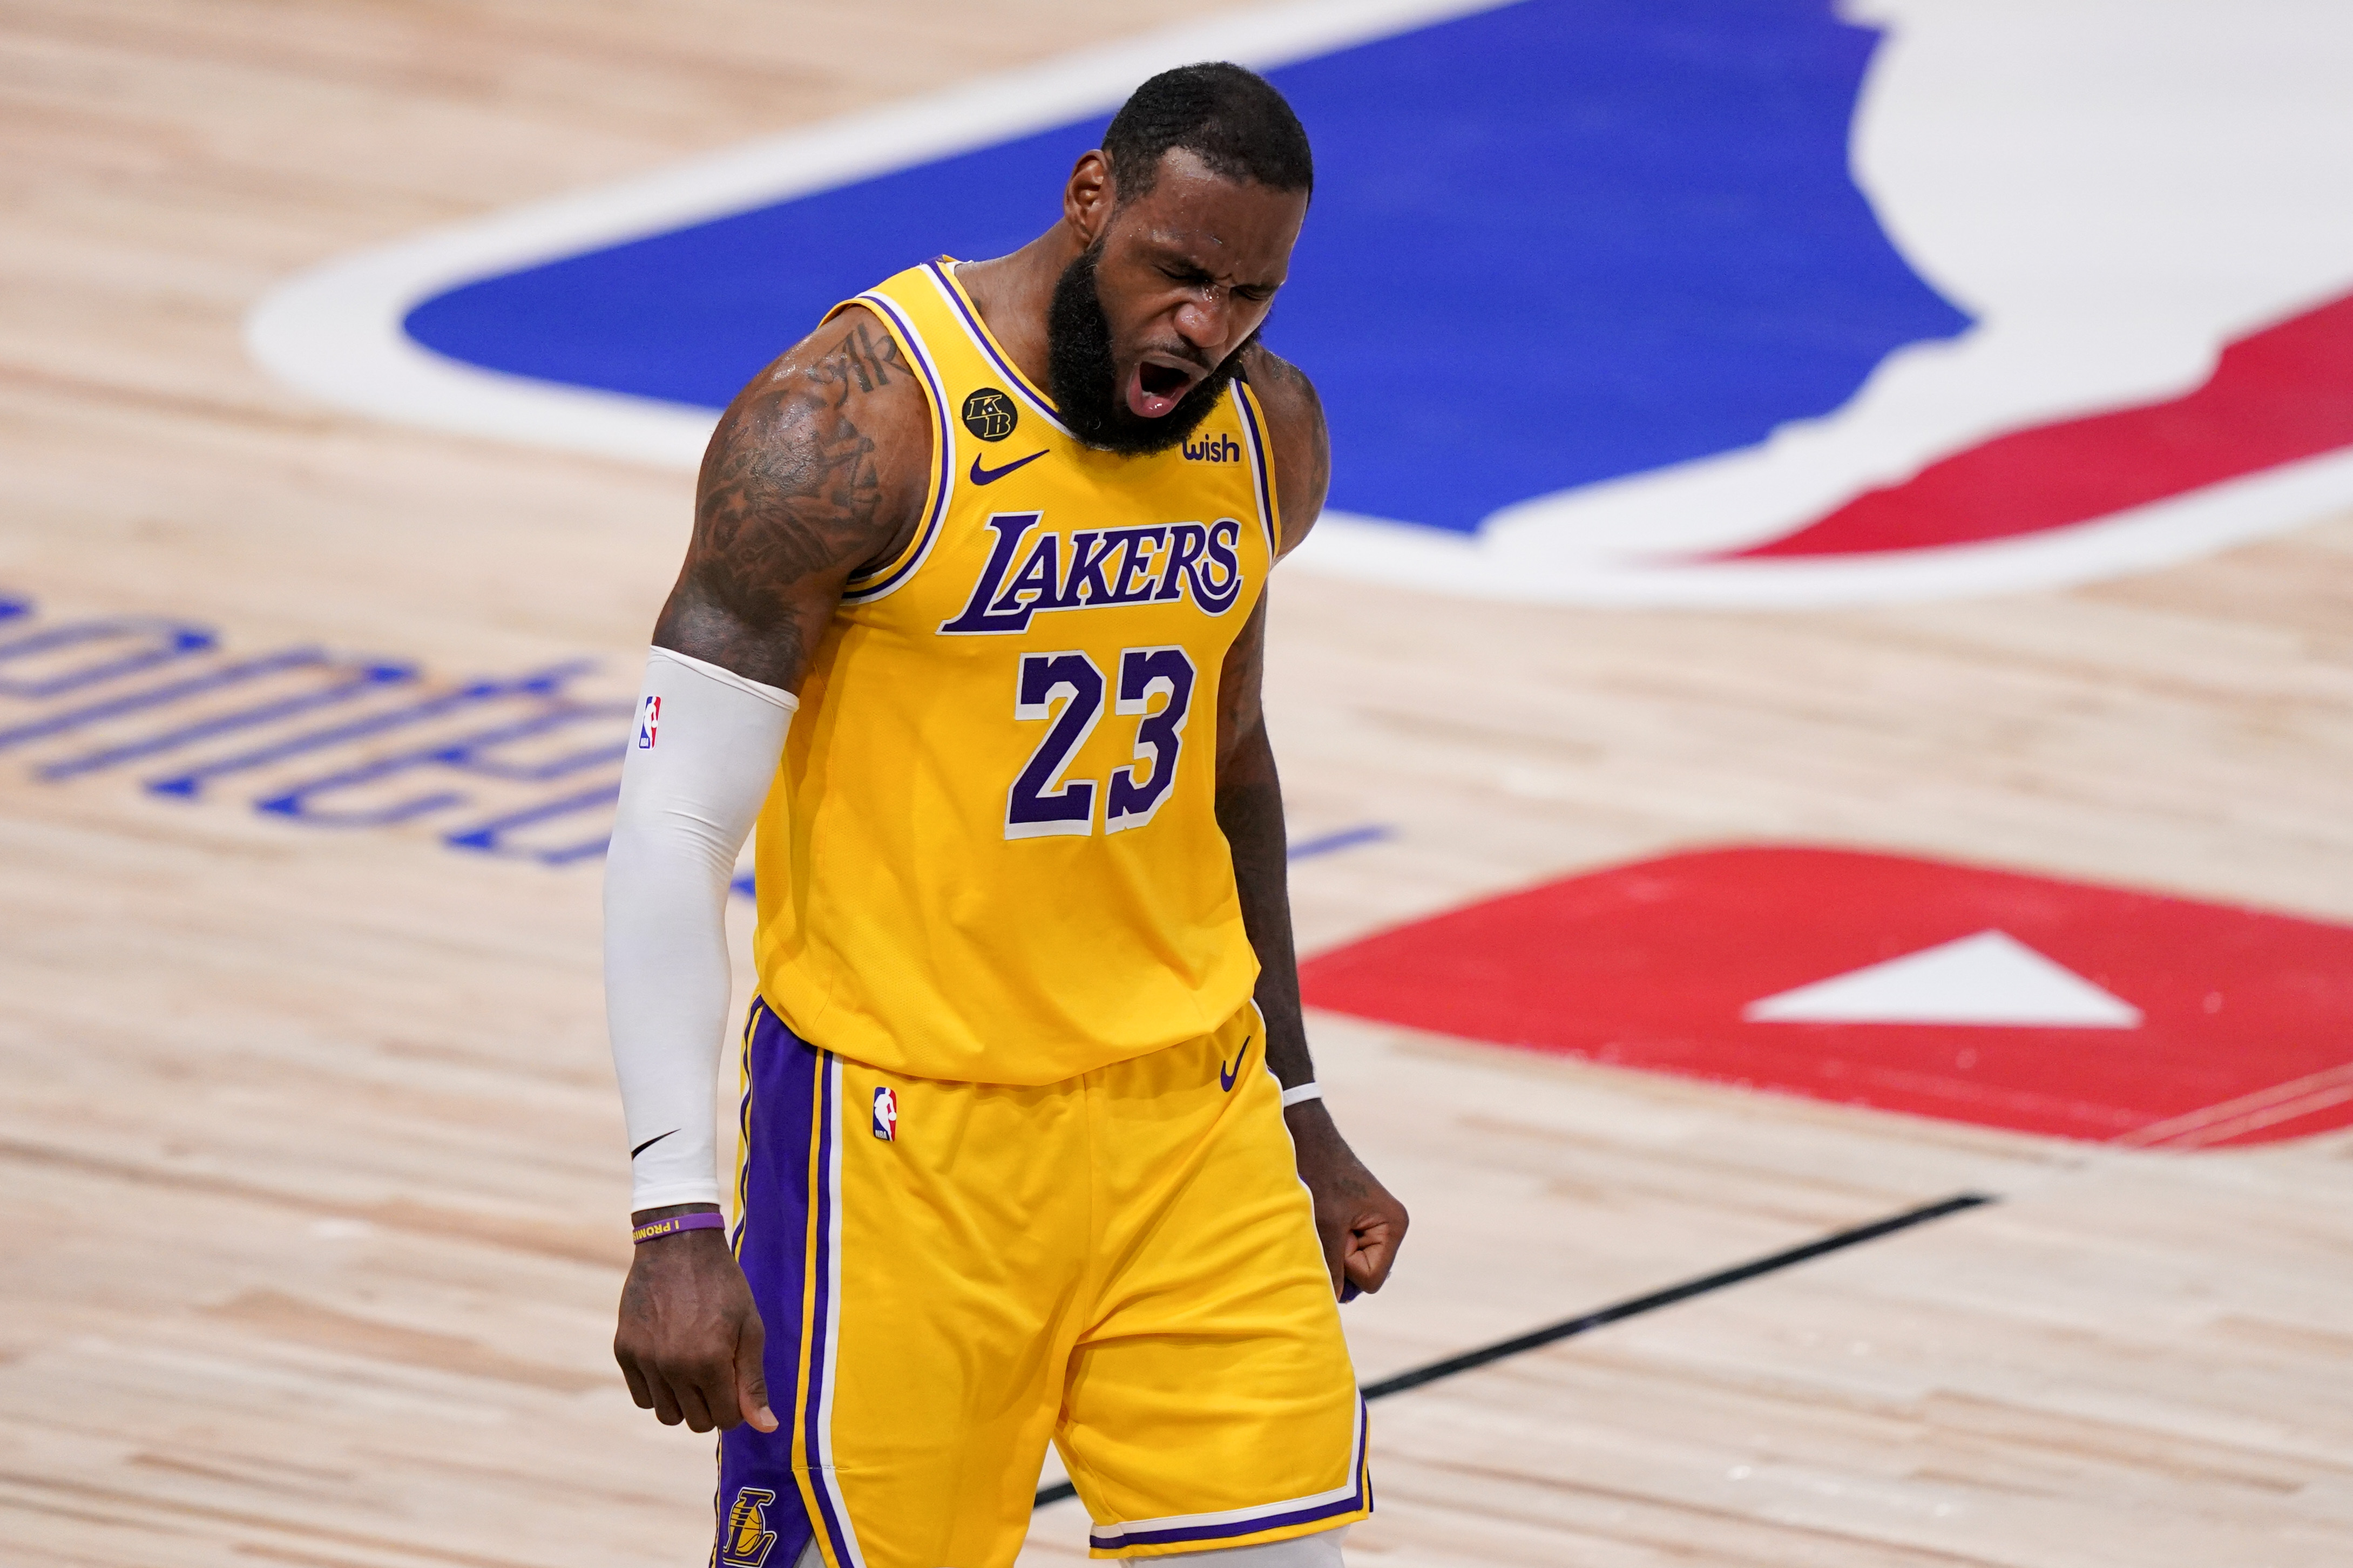 Lakers within one win of another NBA title - The Boston Globe